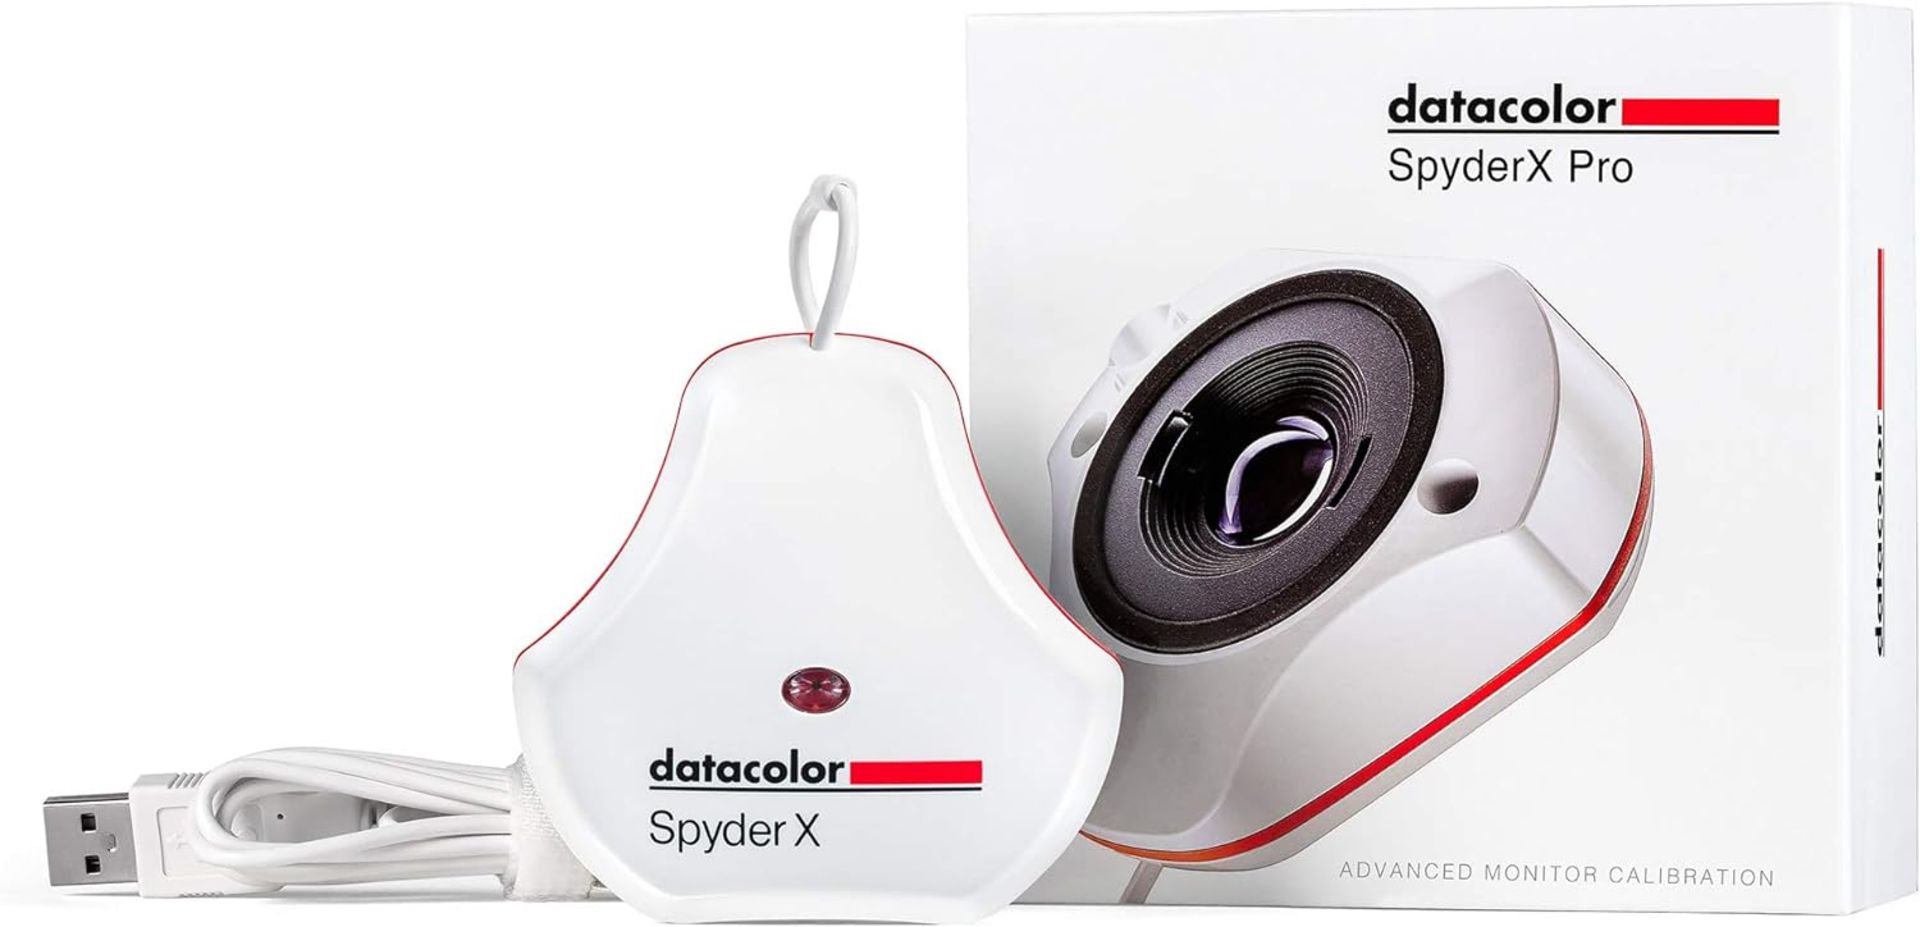 RRP £119 Datacolor SpyderX Pro: Monitor Calibration designed for serious Photographers and